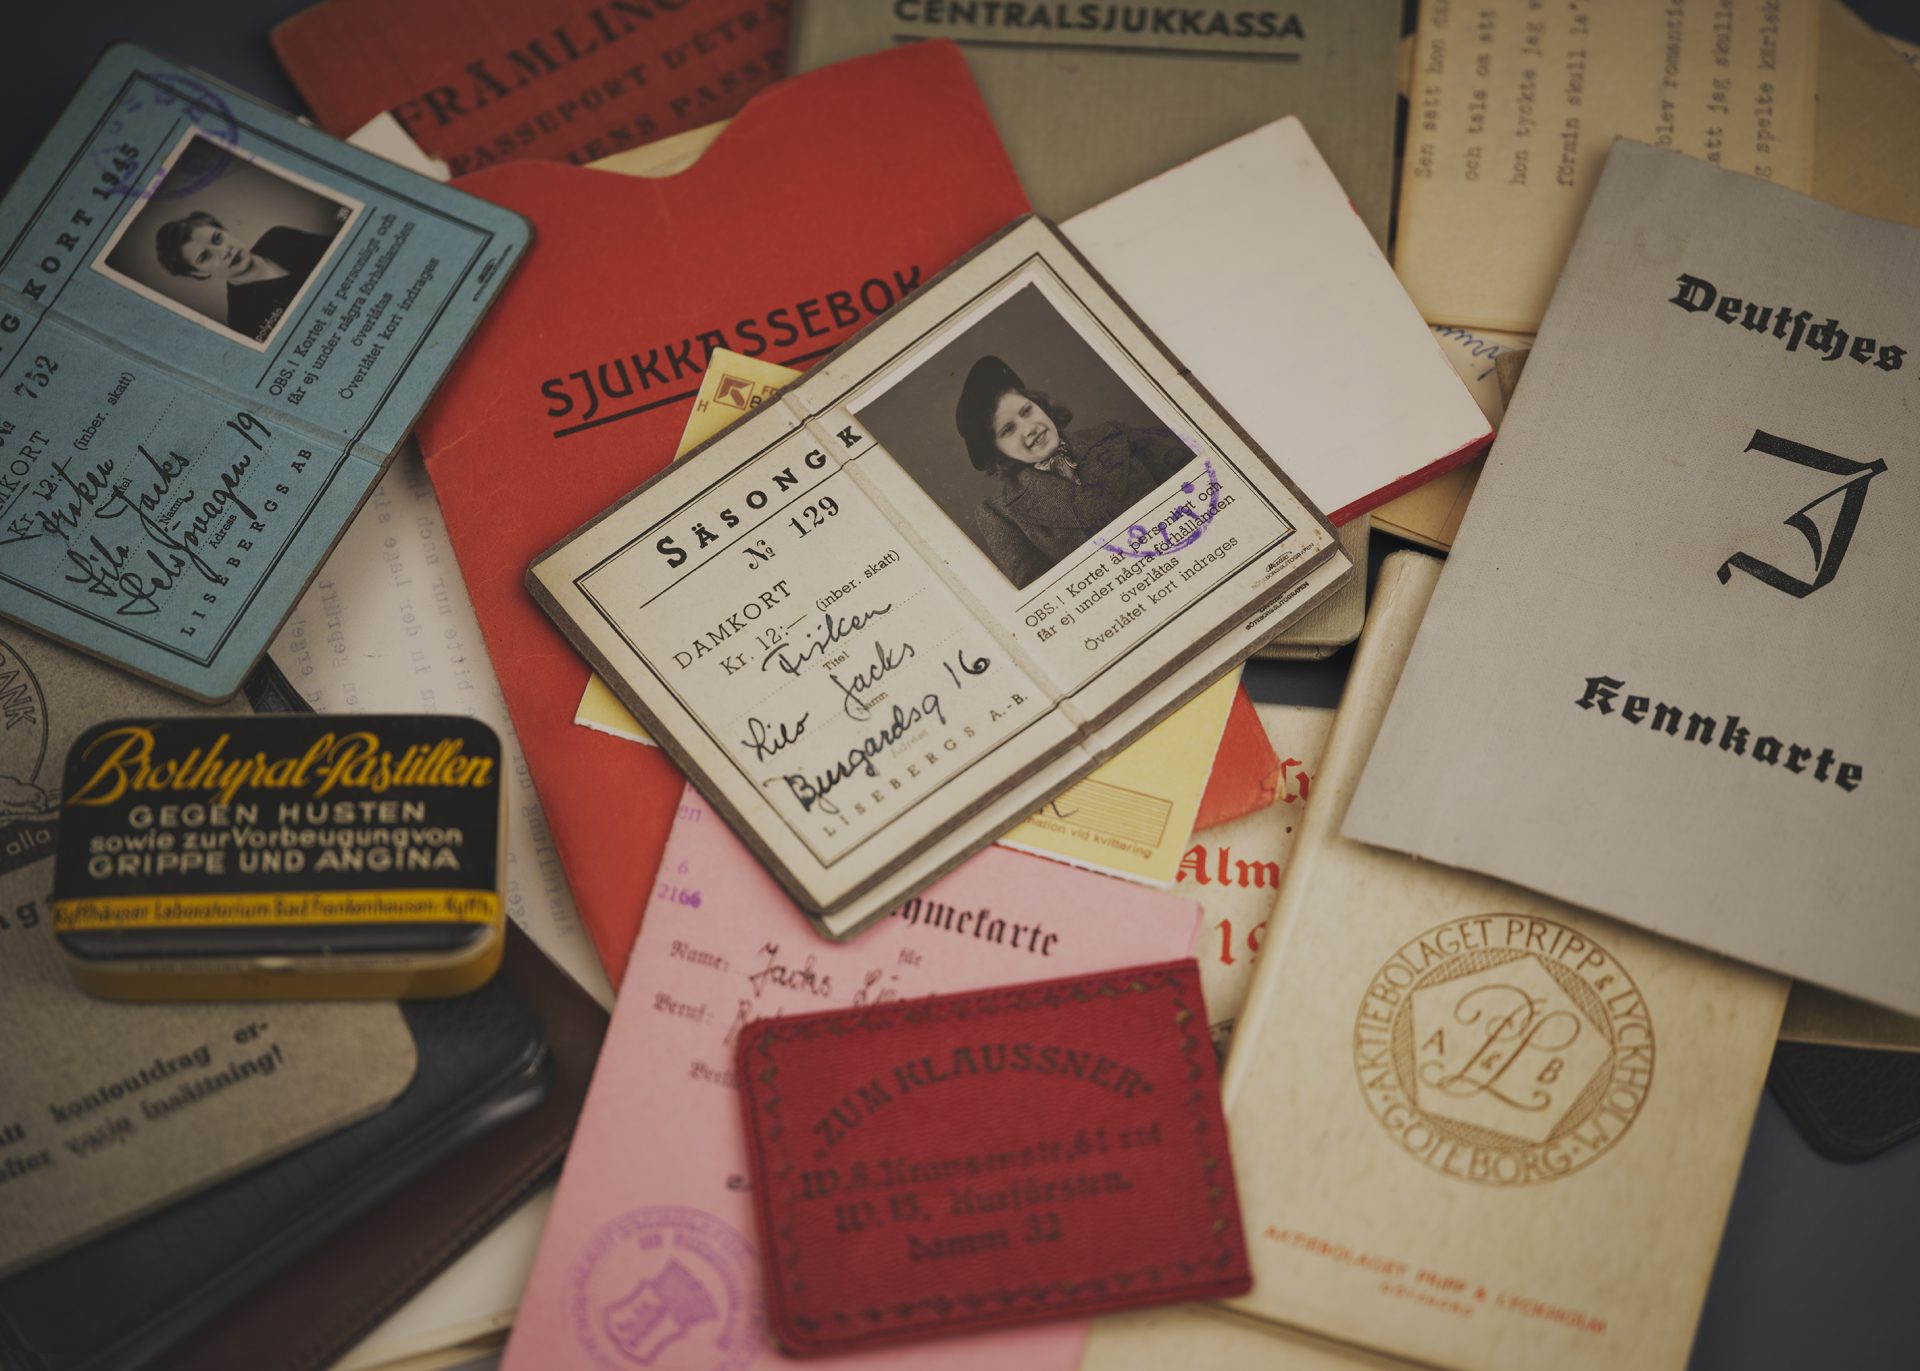 A collection of objects, including a box and various identity documents.